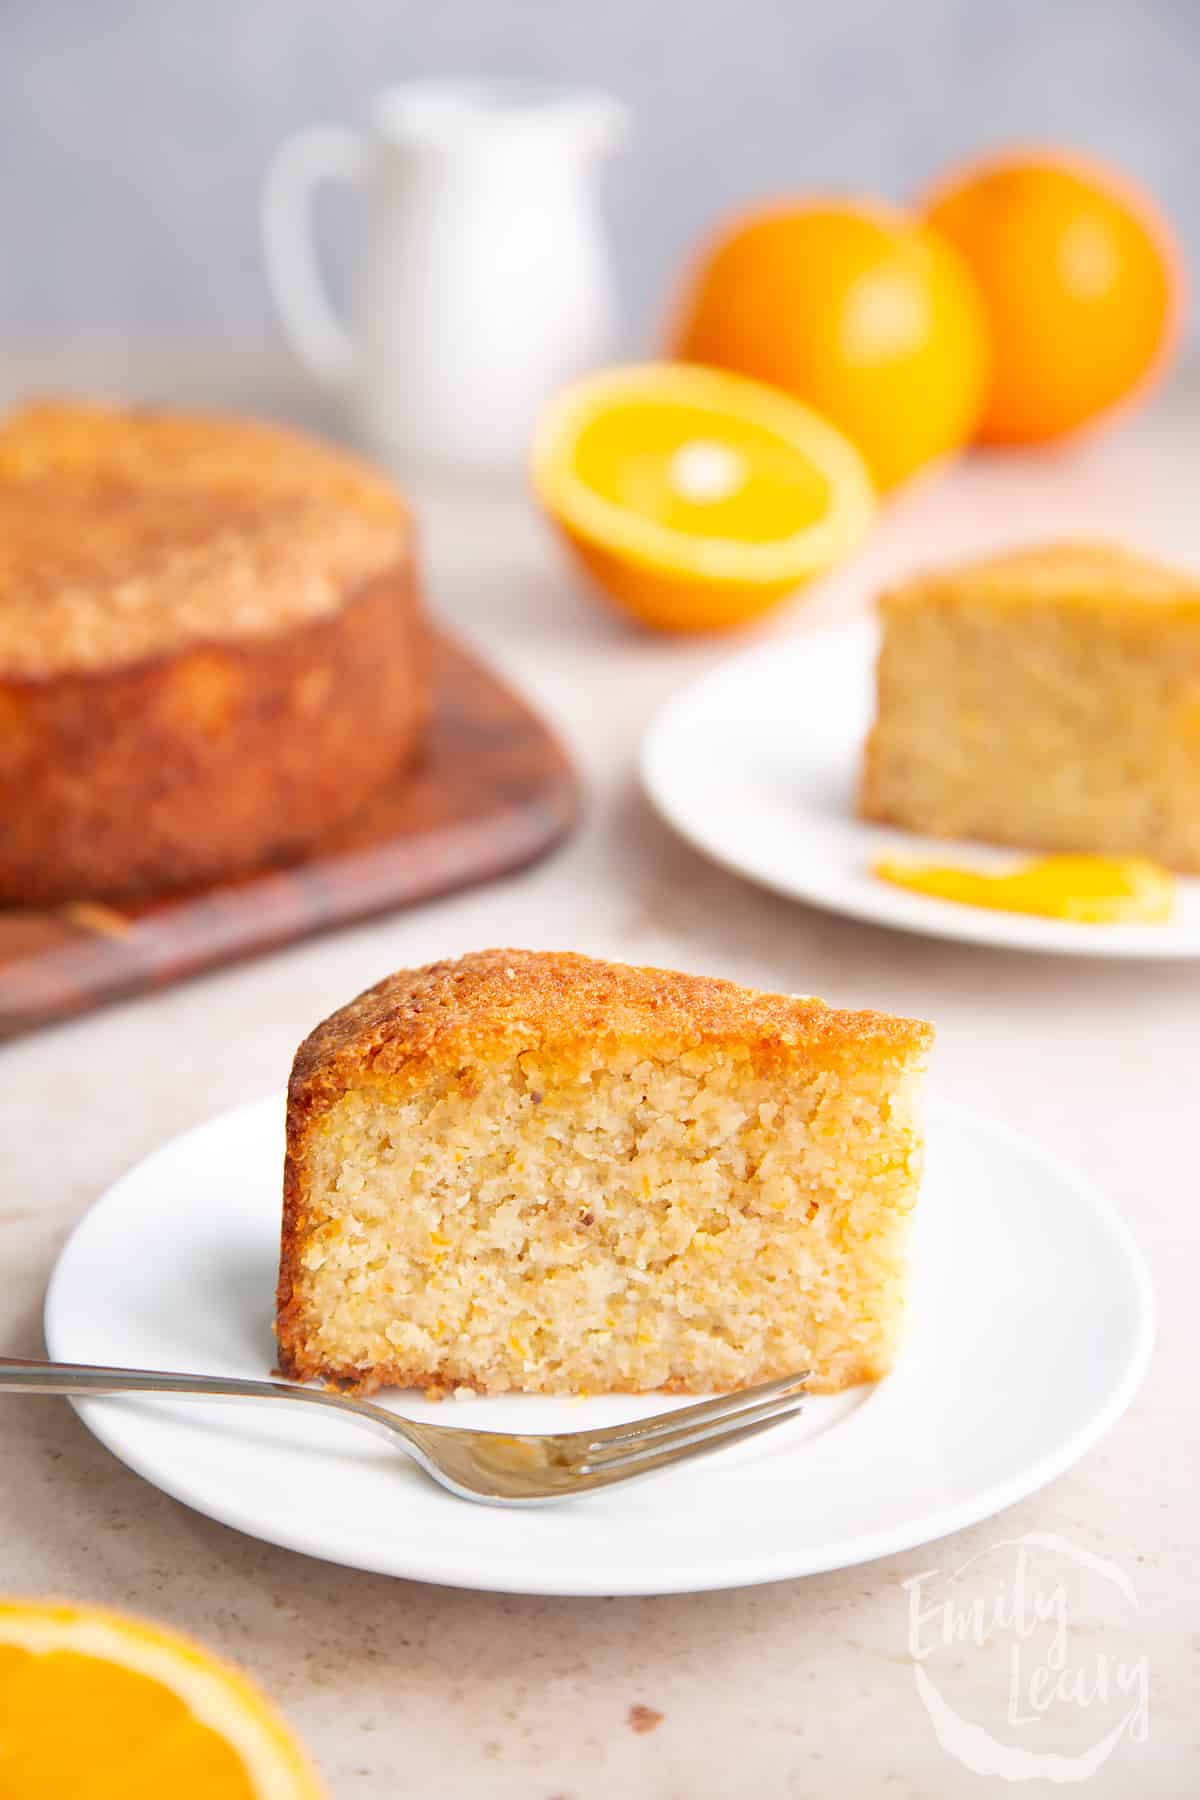 White plate with a small slice of gluten free orange cake ontop. A fork on the side and additional gluten free orange cake slices in the background.